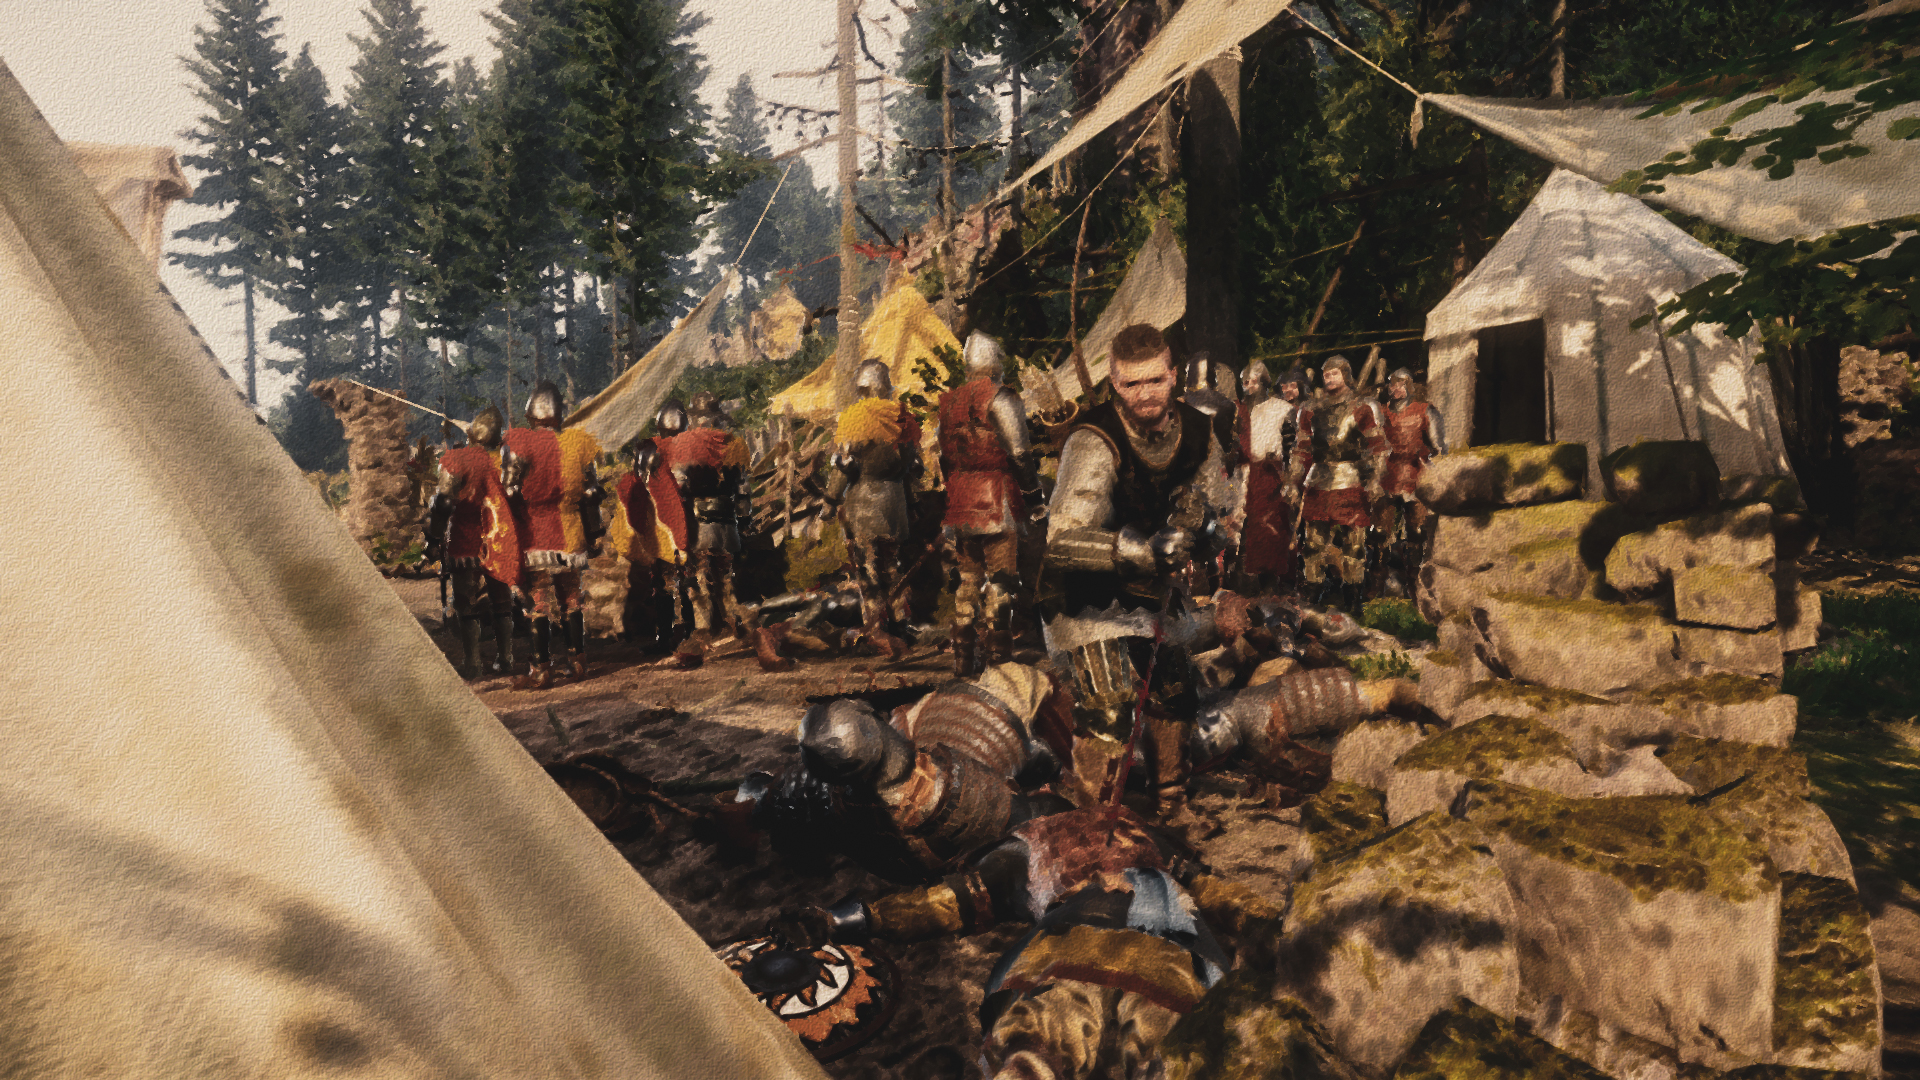 General 1920x1080 Kingdom Come: Deliverance PC gaming screen shot Nvidia Ansel video game characters